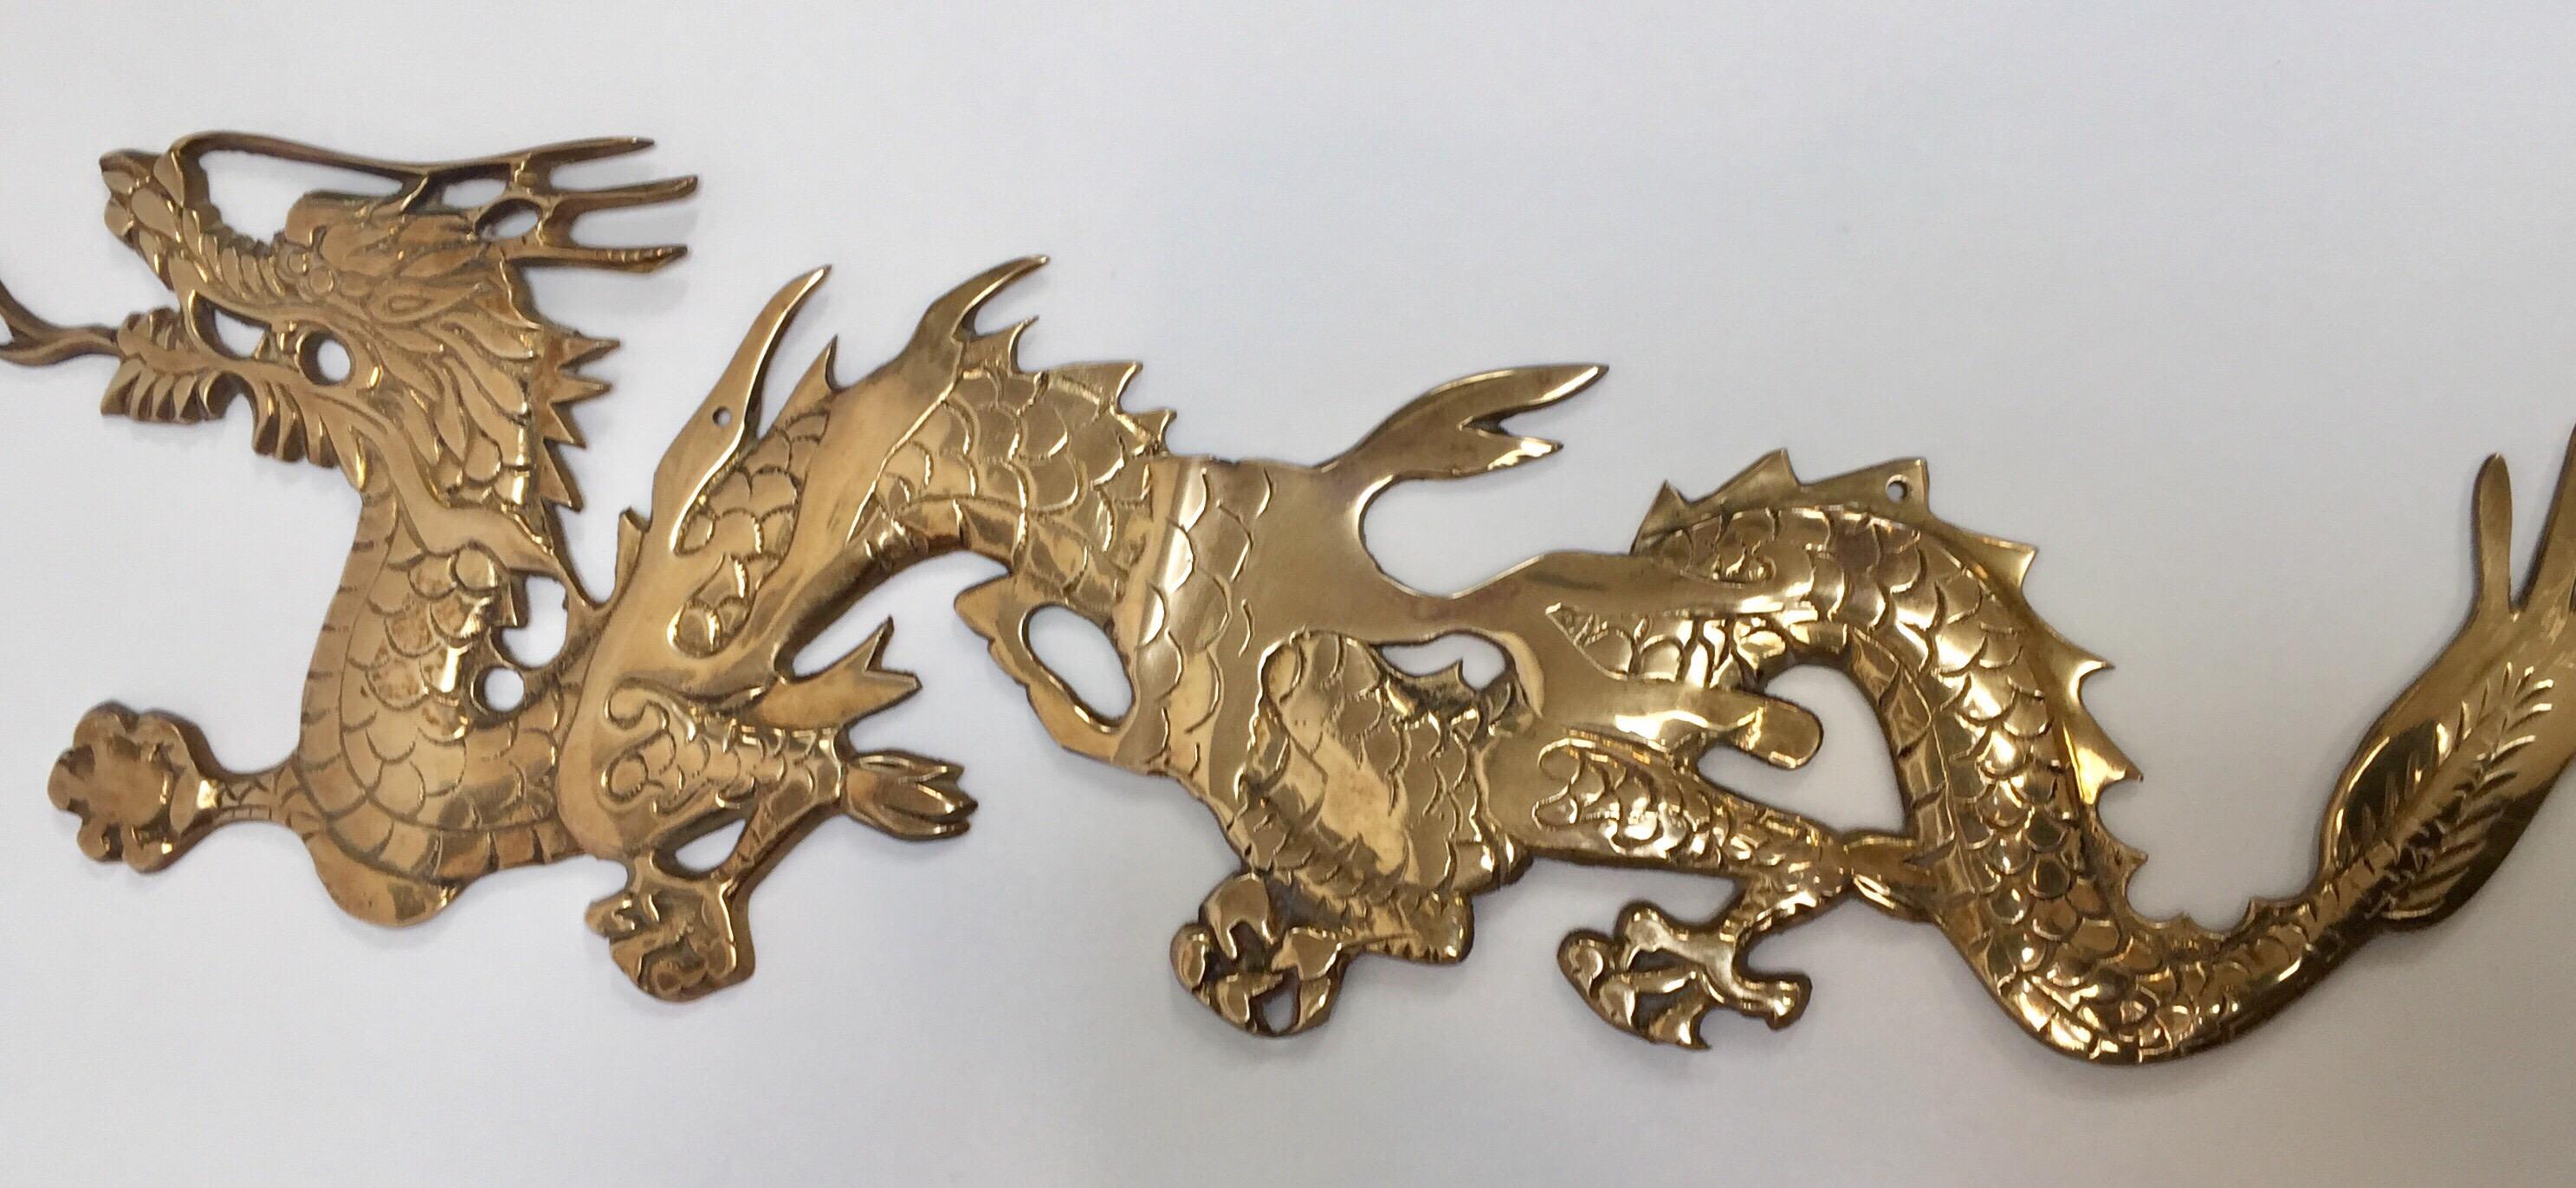 Large Pair of Asian Cast Brass Dragons Chasing a Ball Wall Mount 4